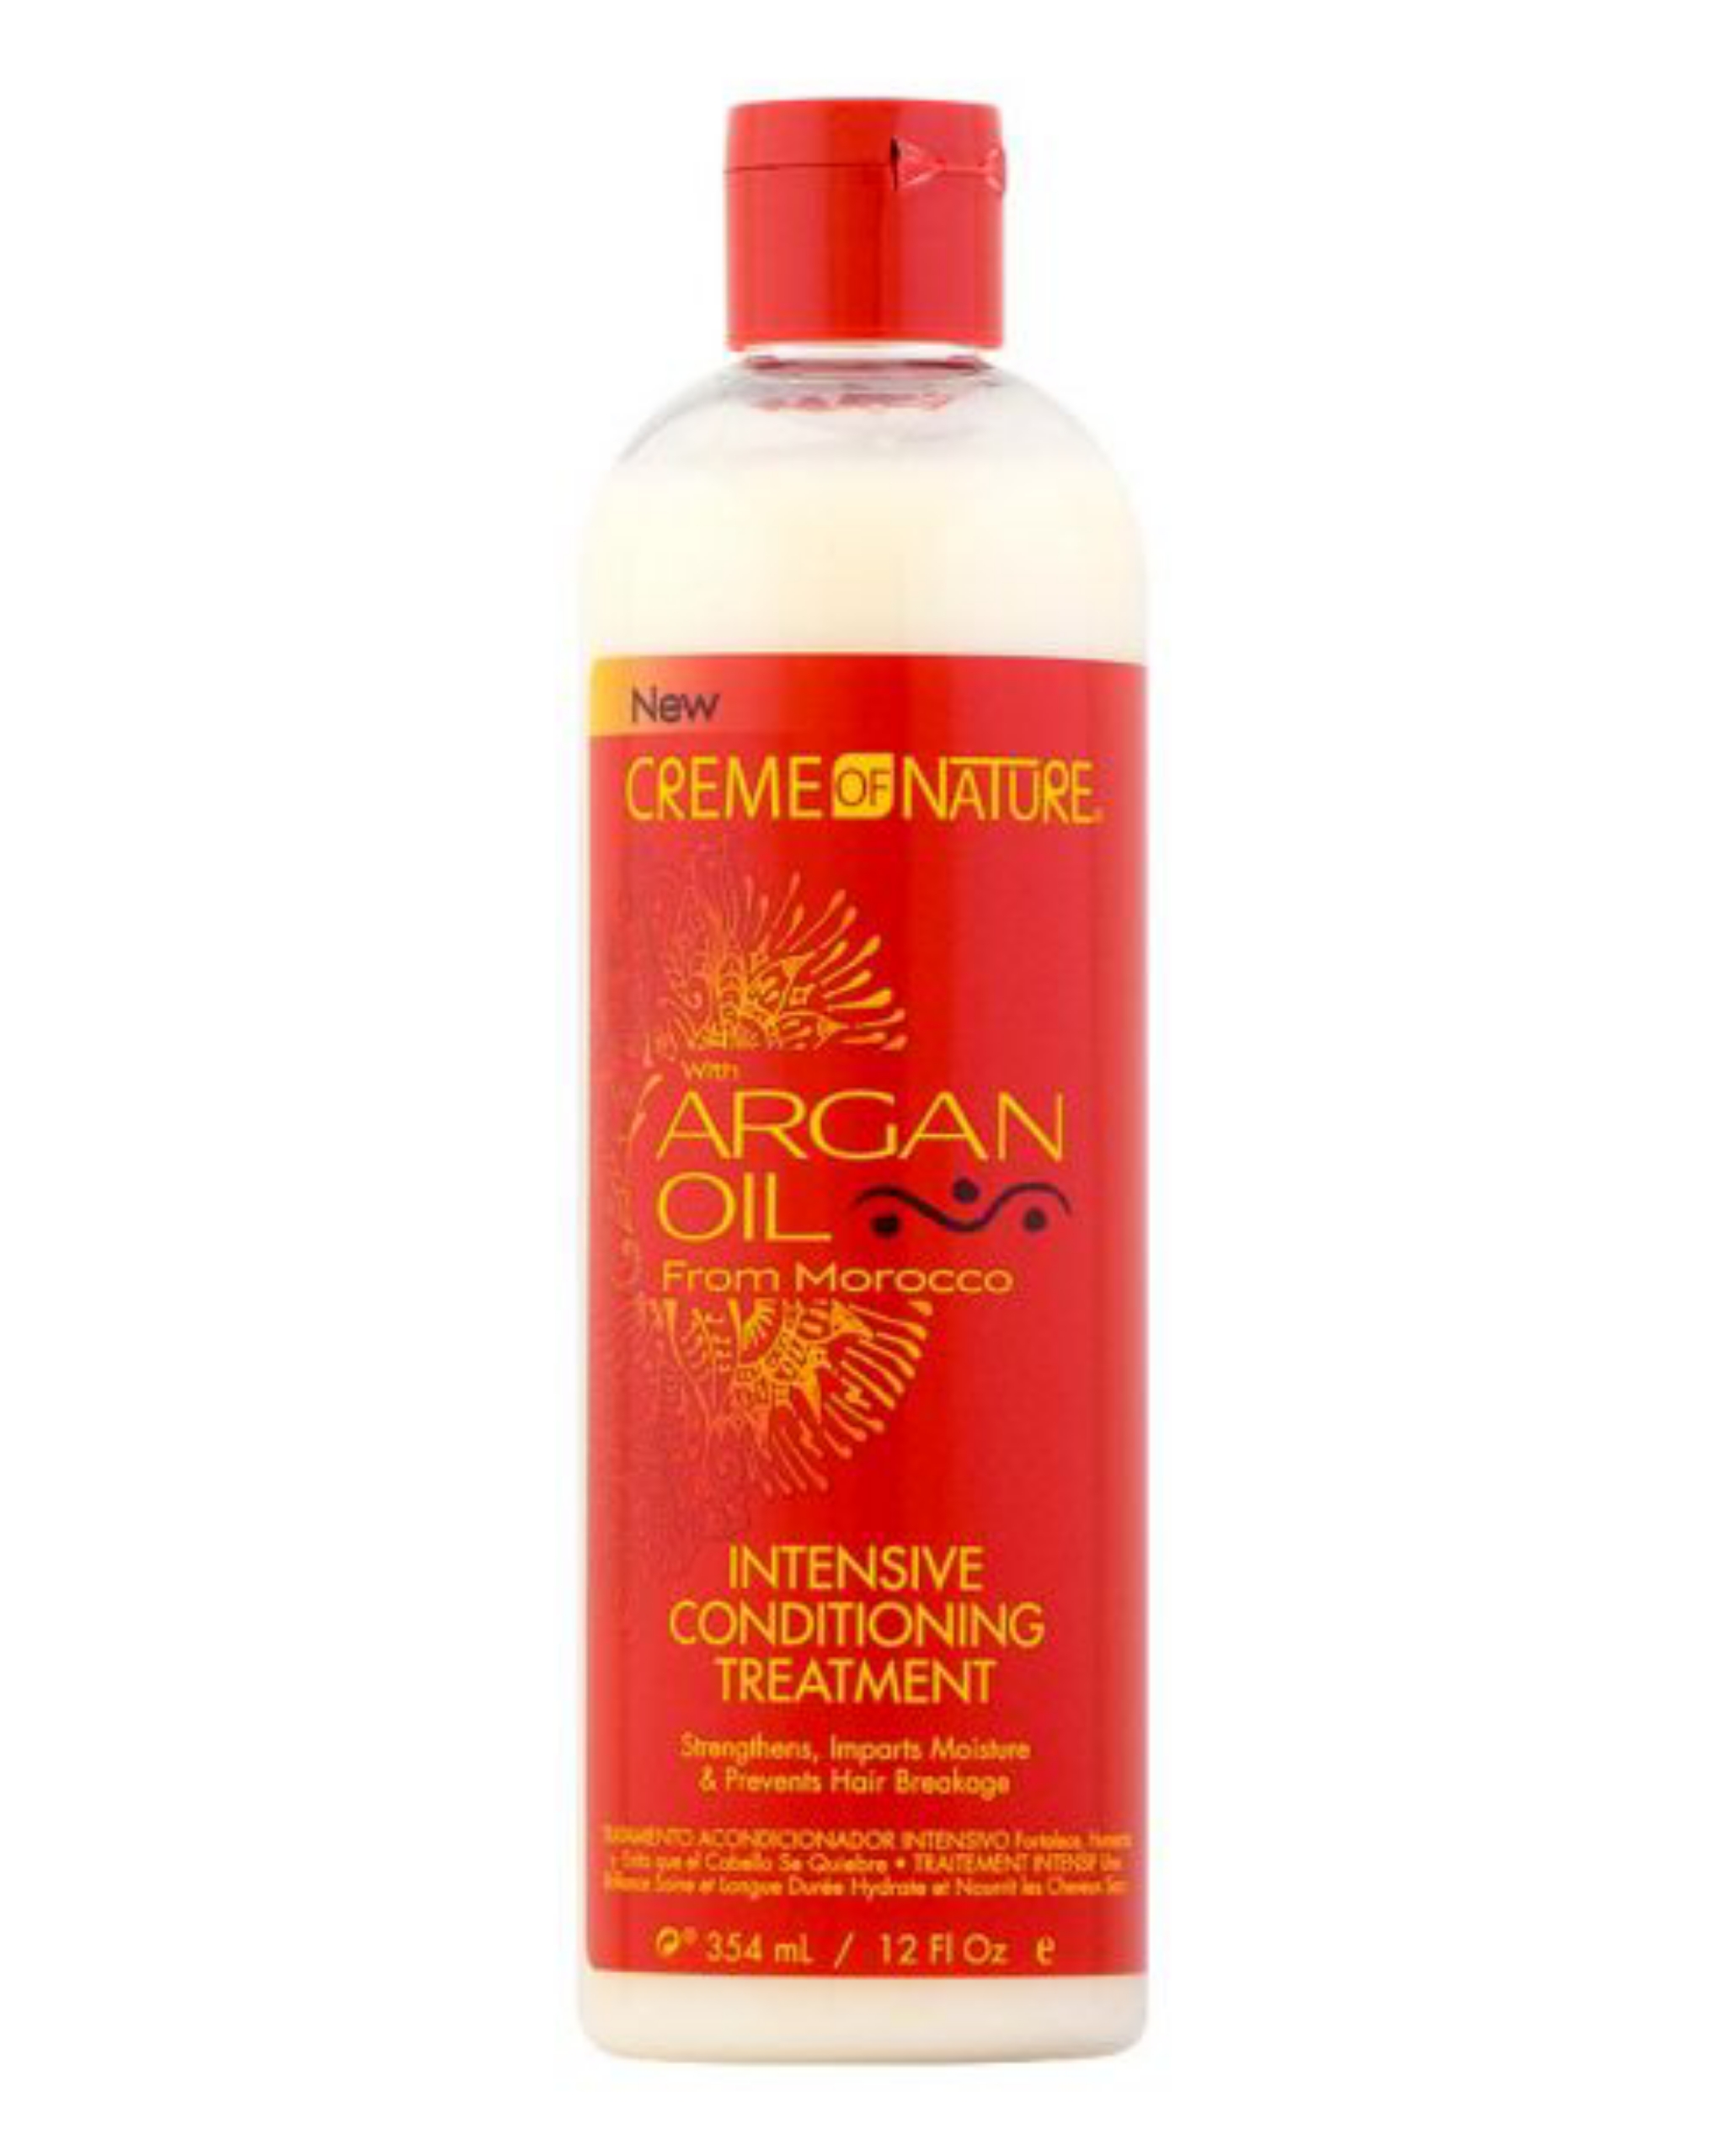 Creme of Nature Argan Oil Intensive Conditioning Treatment 12Oz